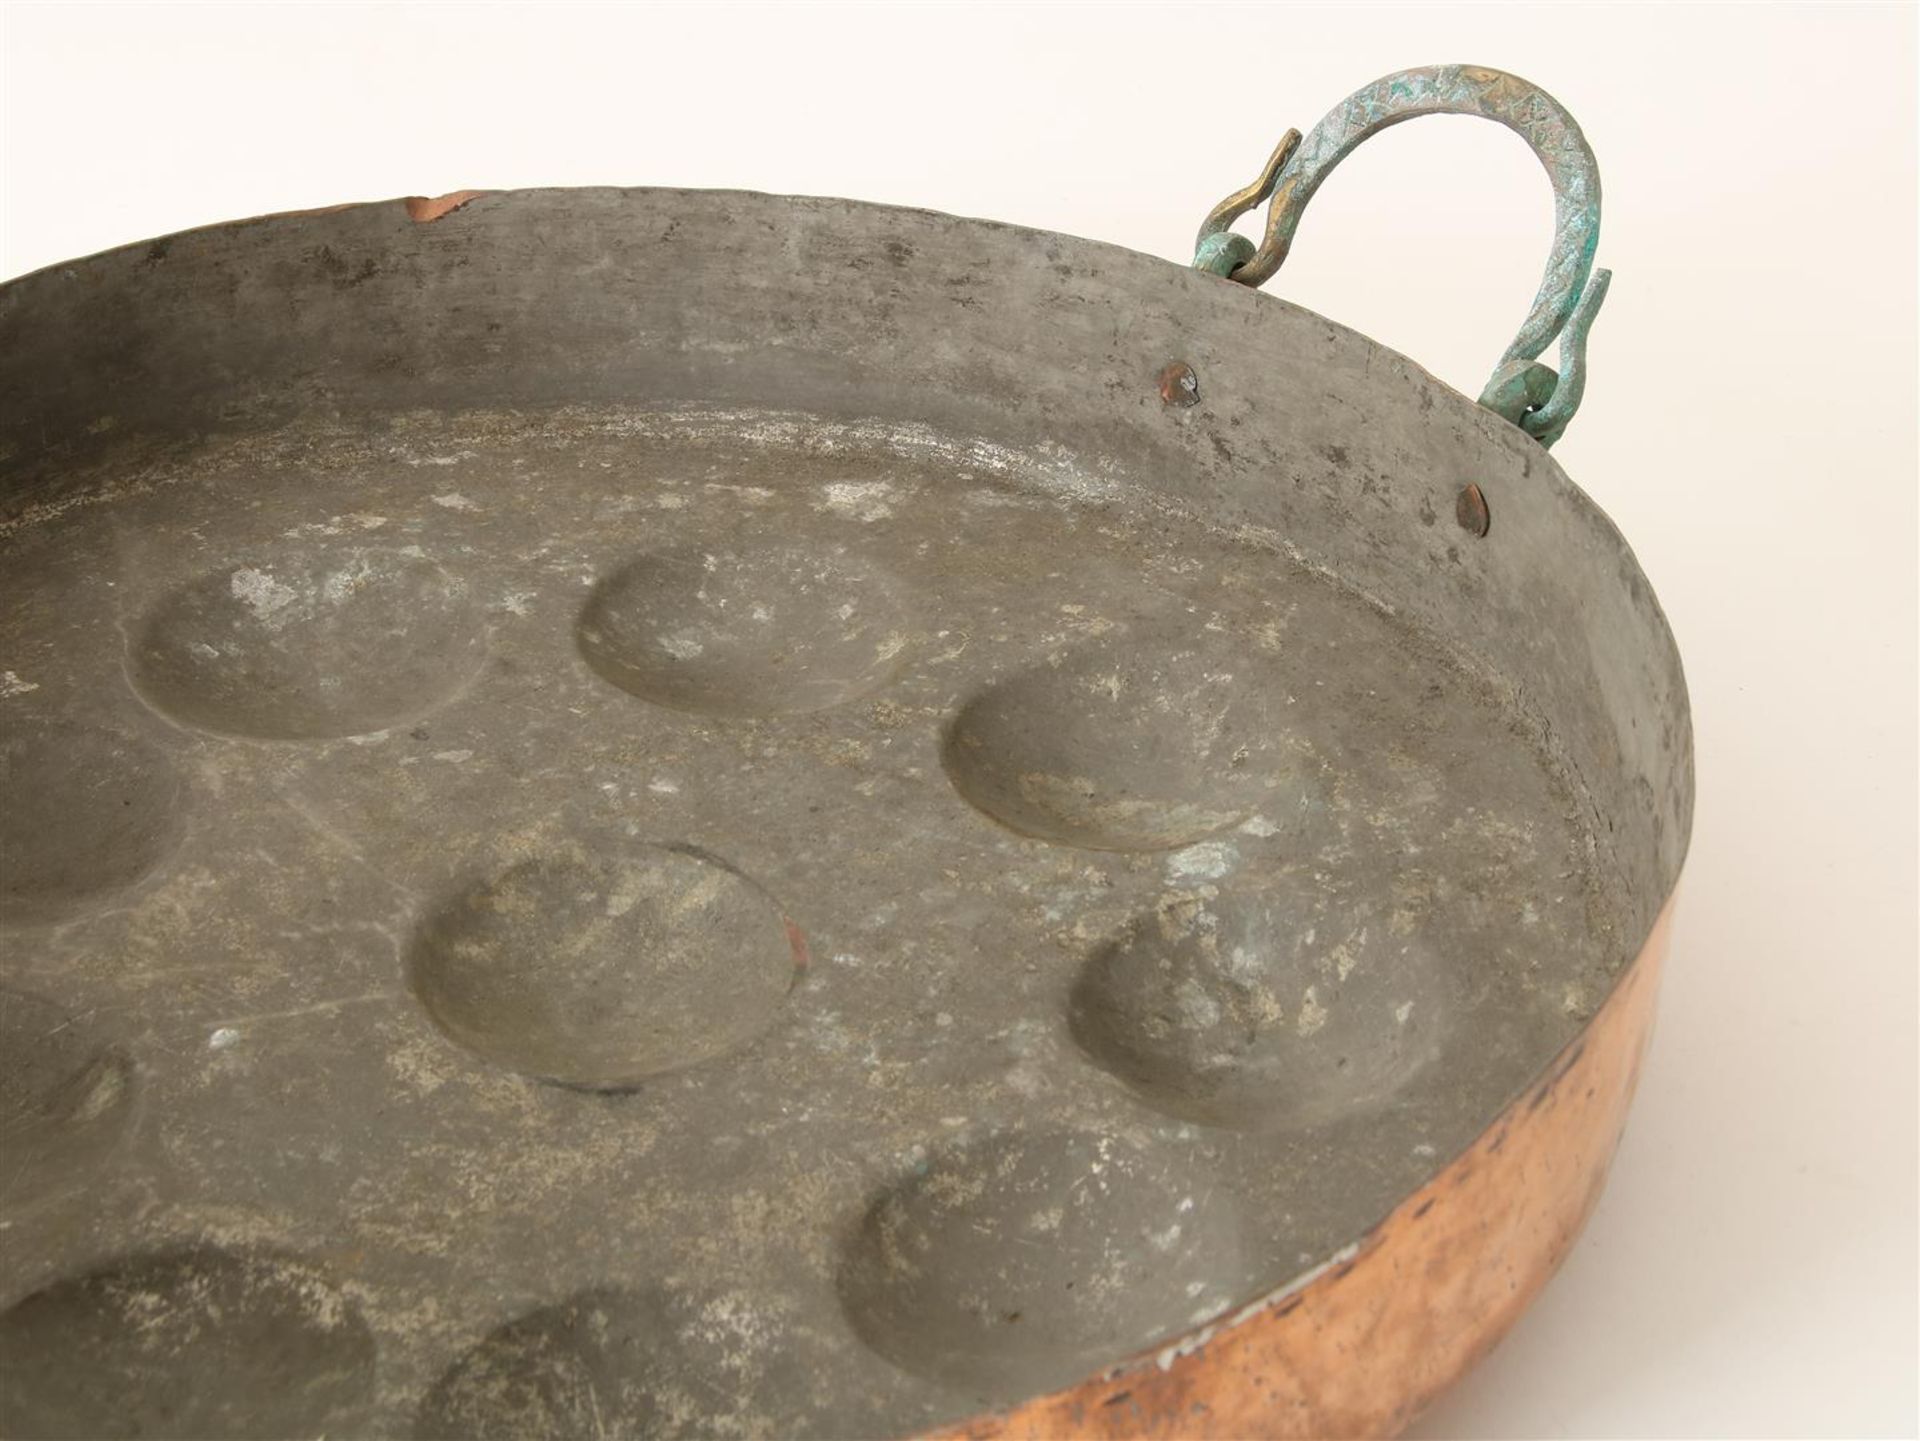 Lot of two red copper egg pans, 19th century, diameter 40 cm. - Image 2 of 2